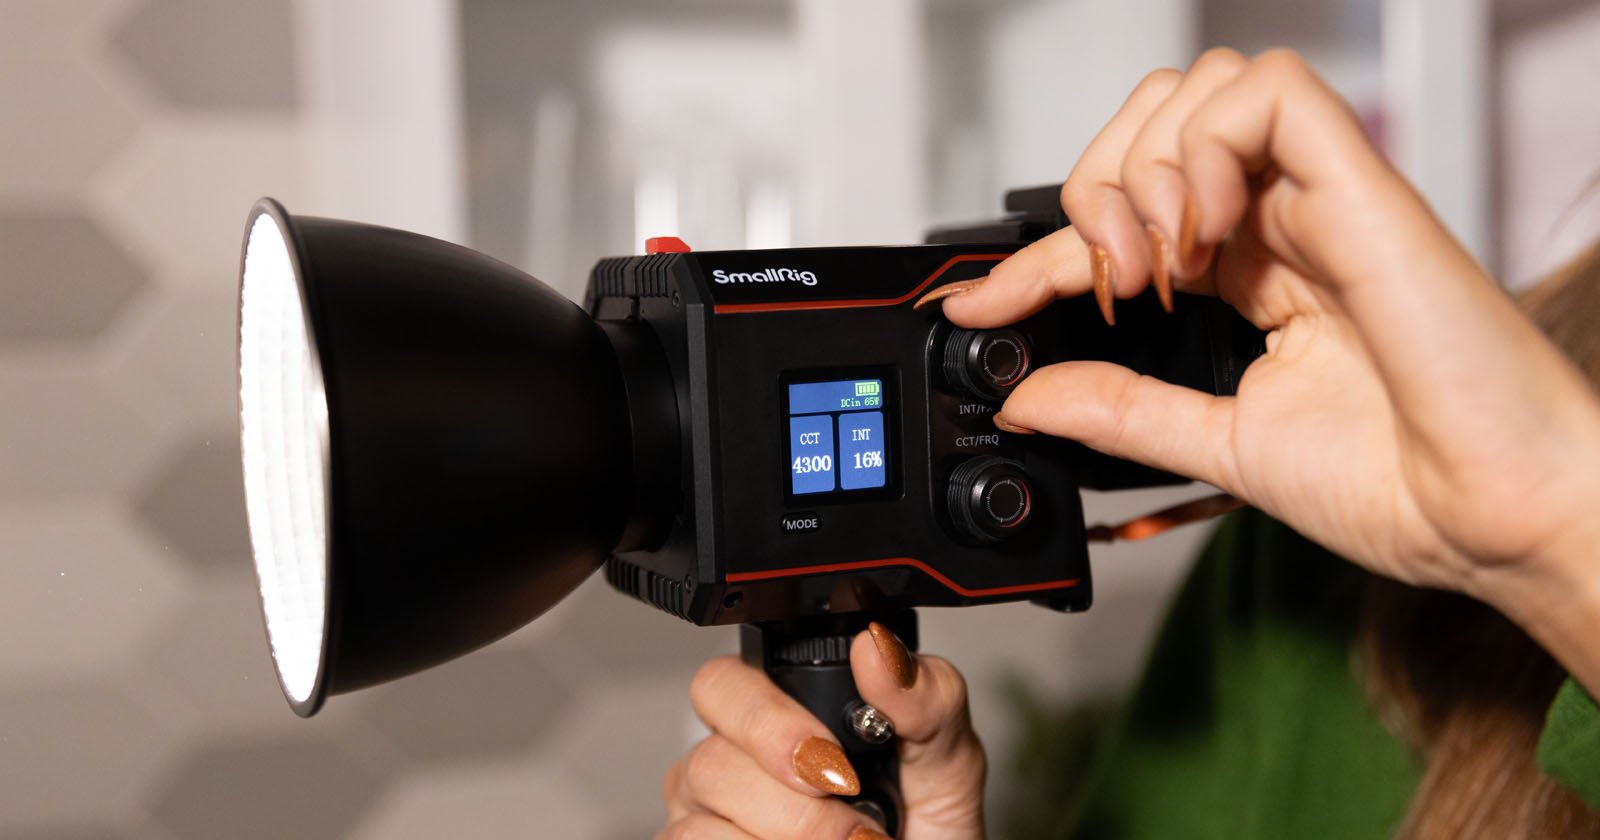 SmallRigs New Video Light is Small, Lightweight, and Affordable